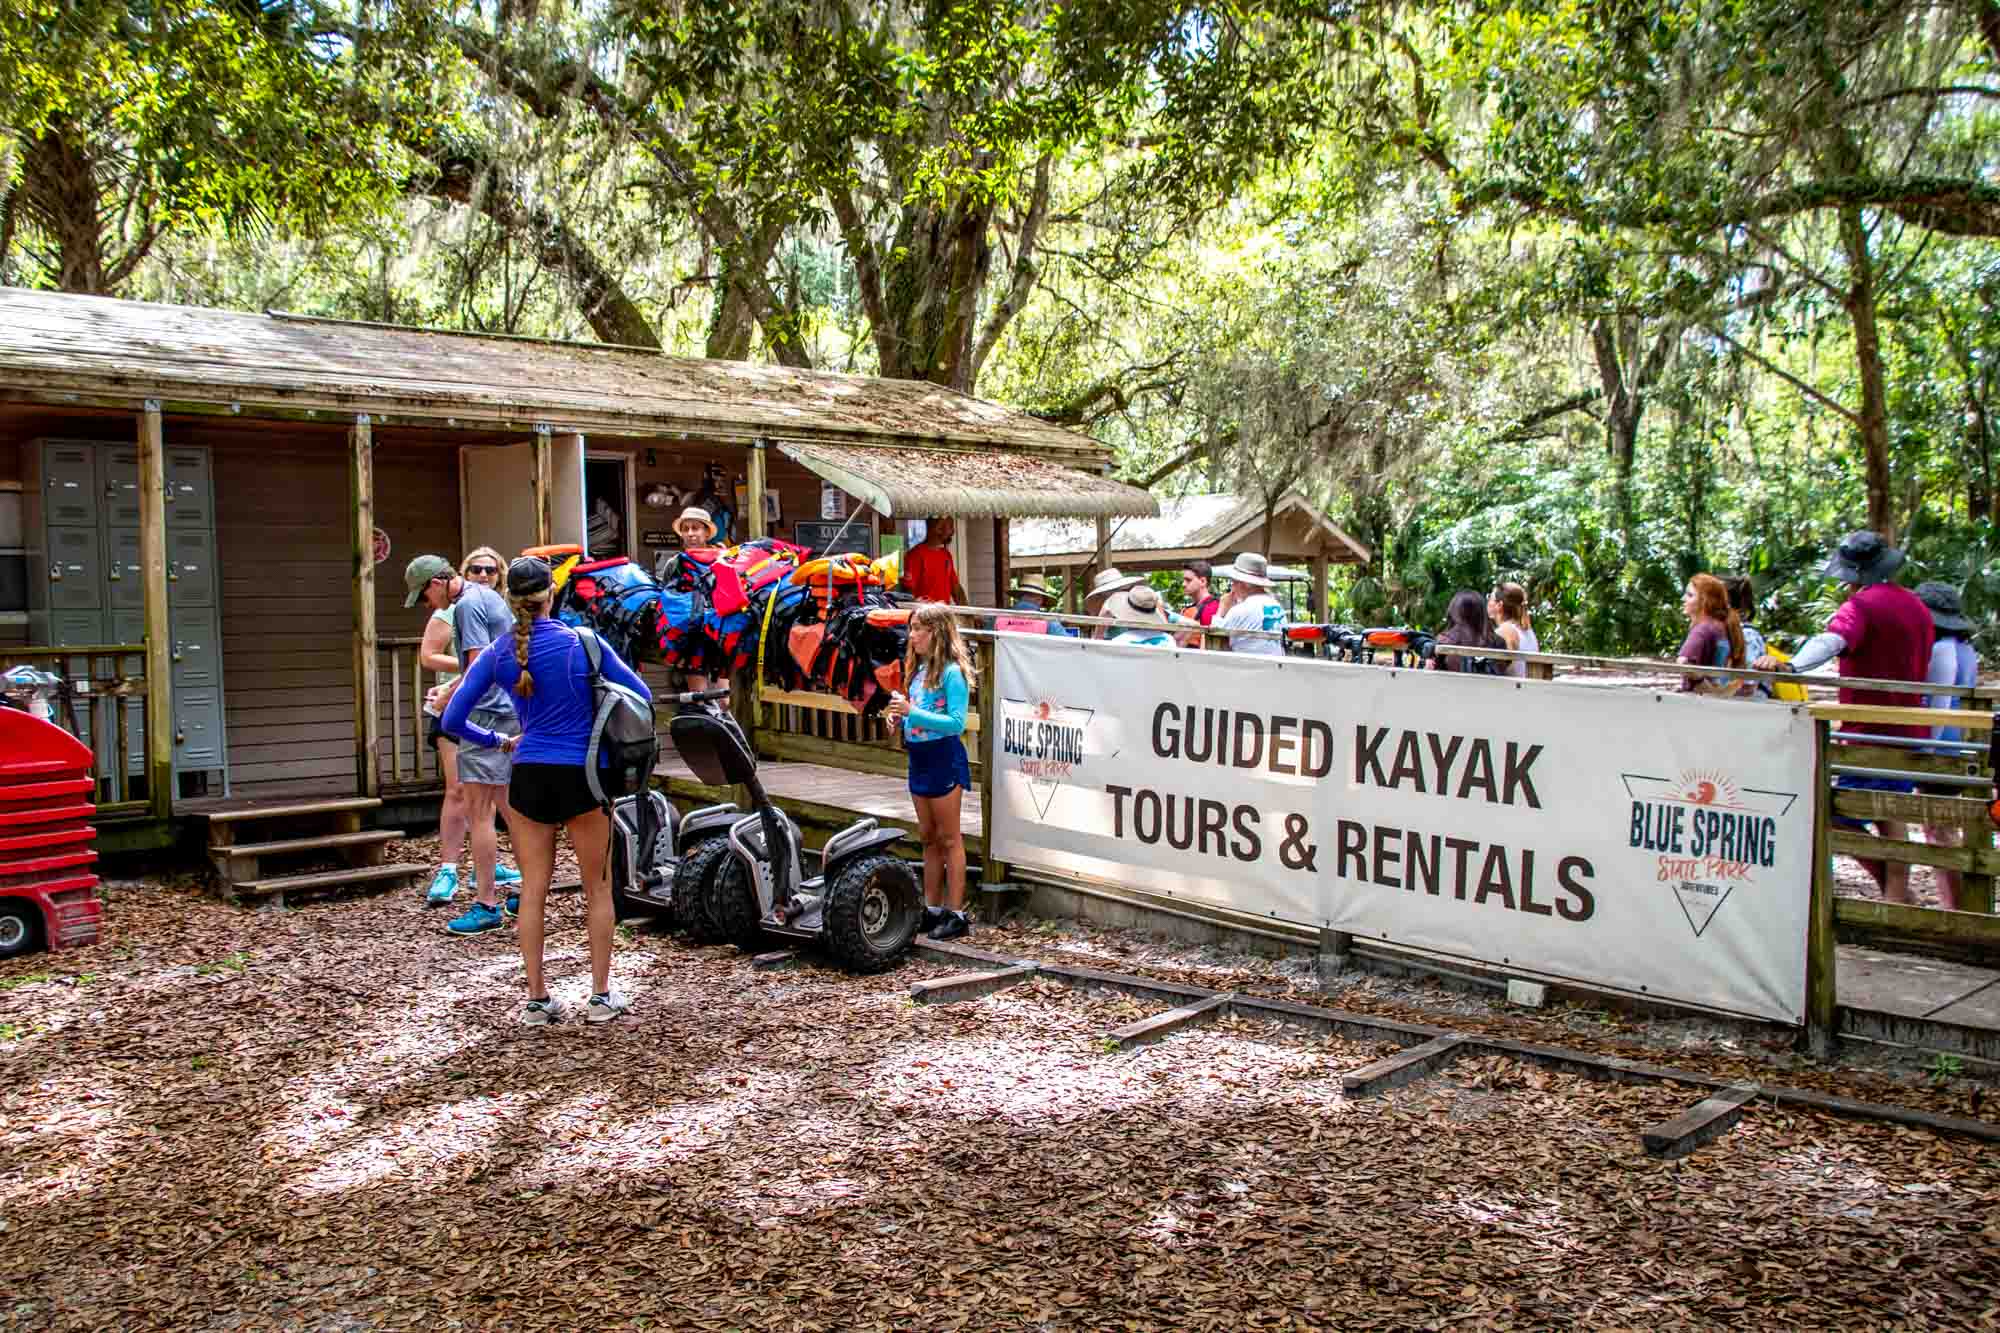 Place to rent kayaks in Blue Spring